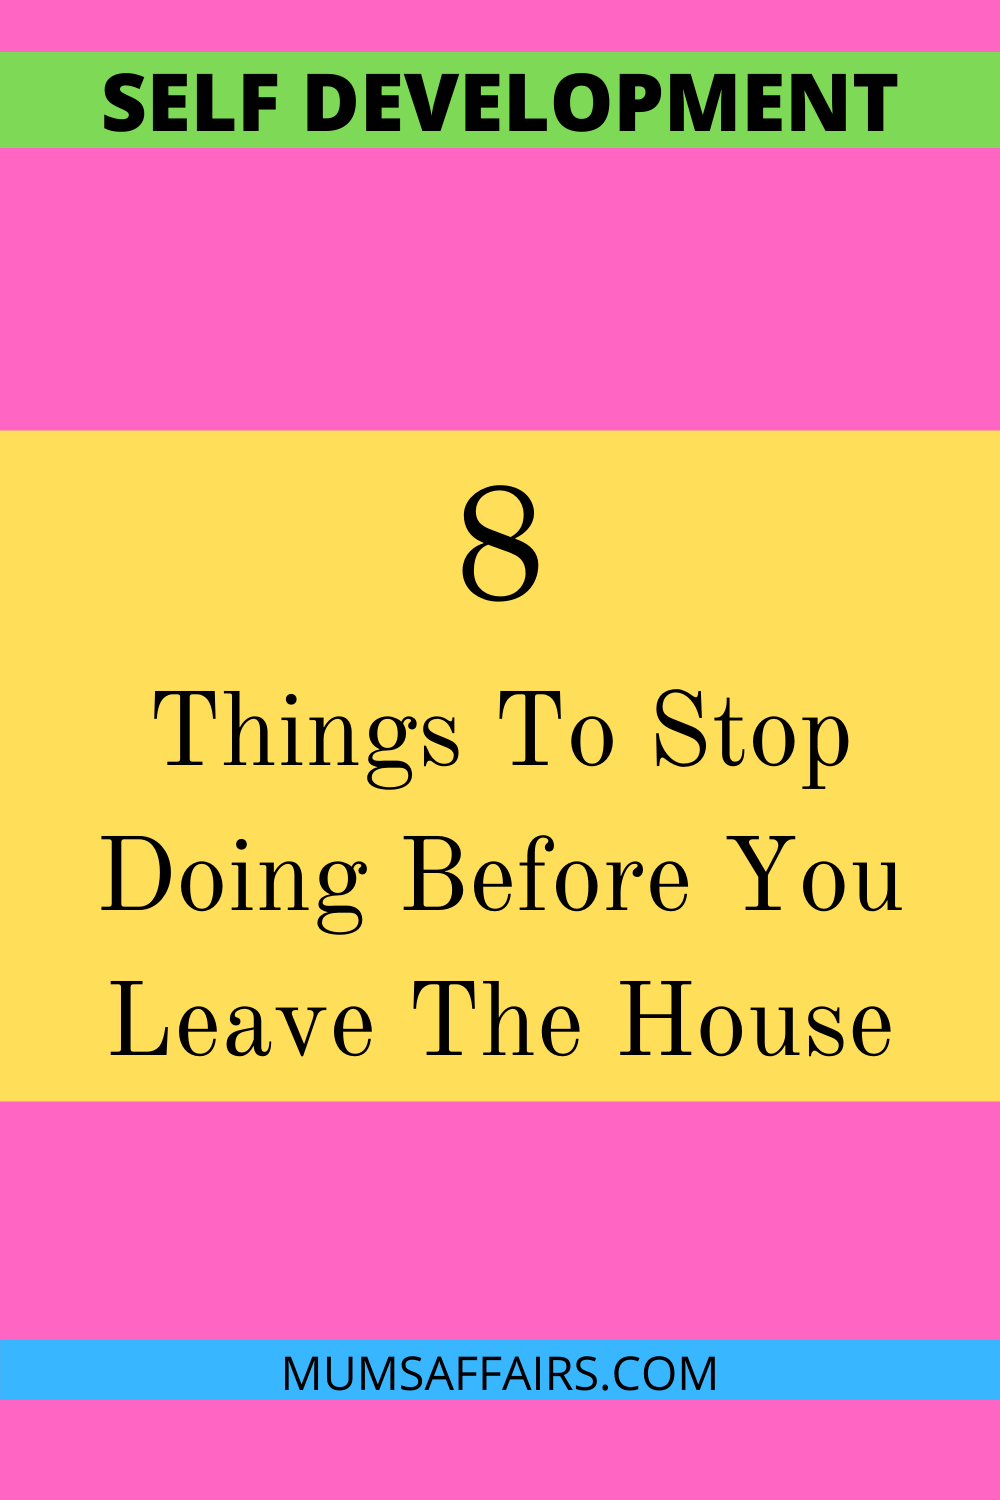 Important Things To Stop Doing Before You Leave The House